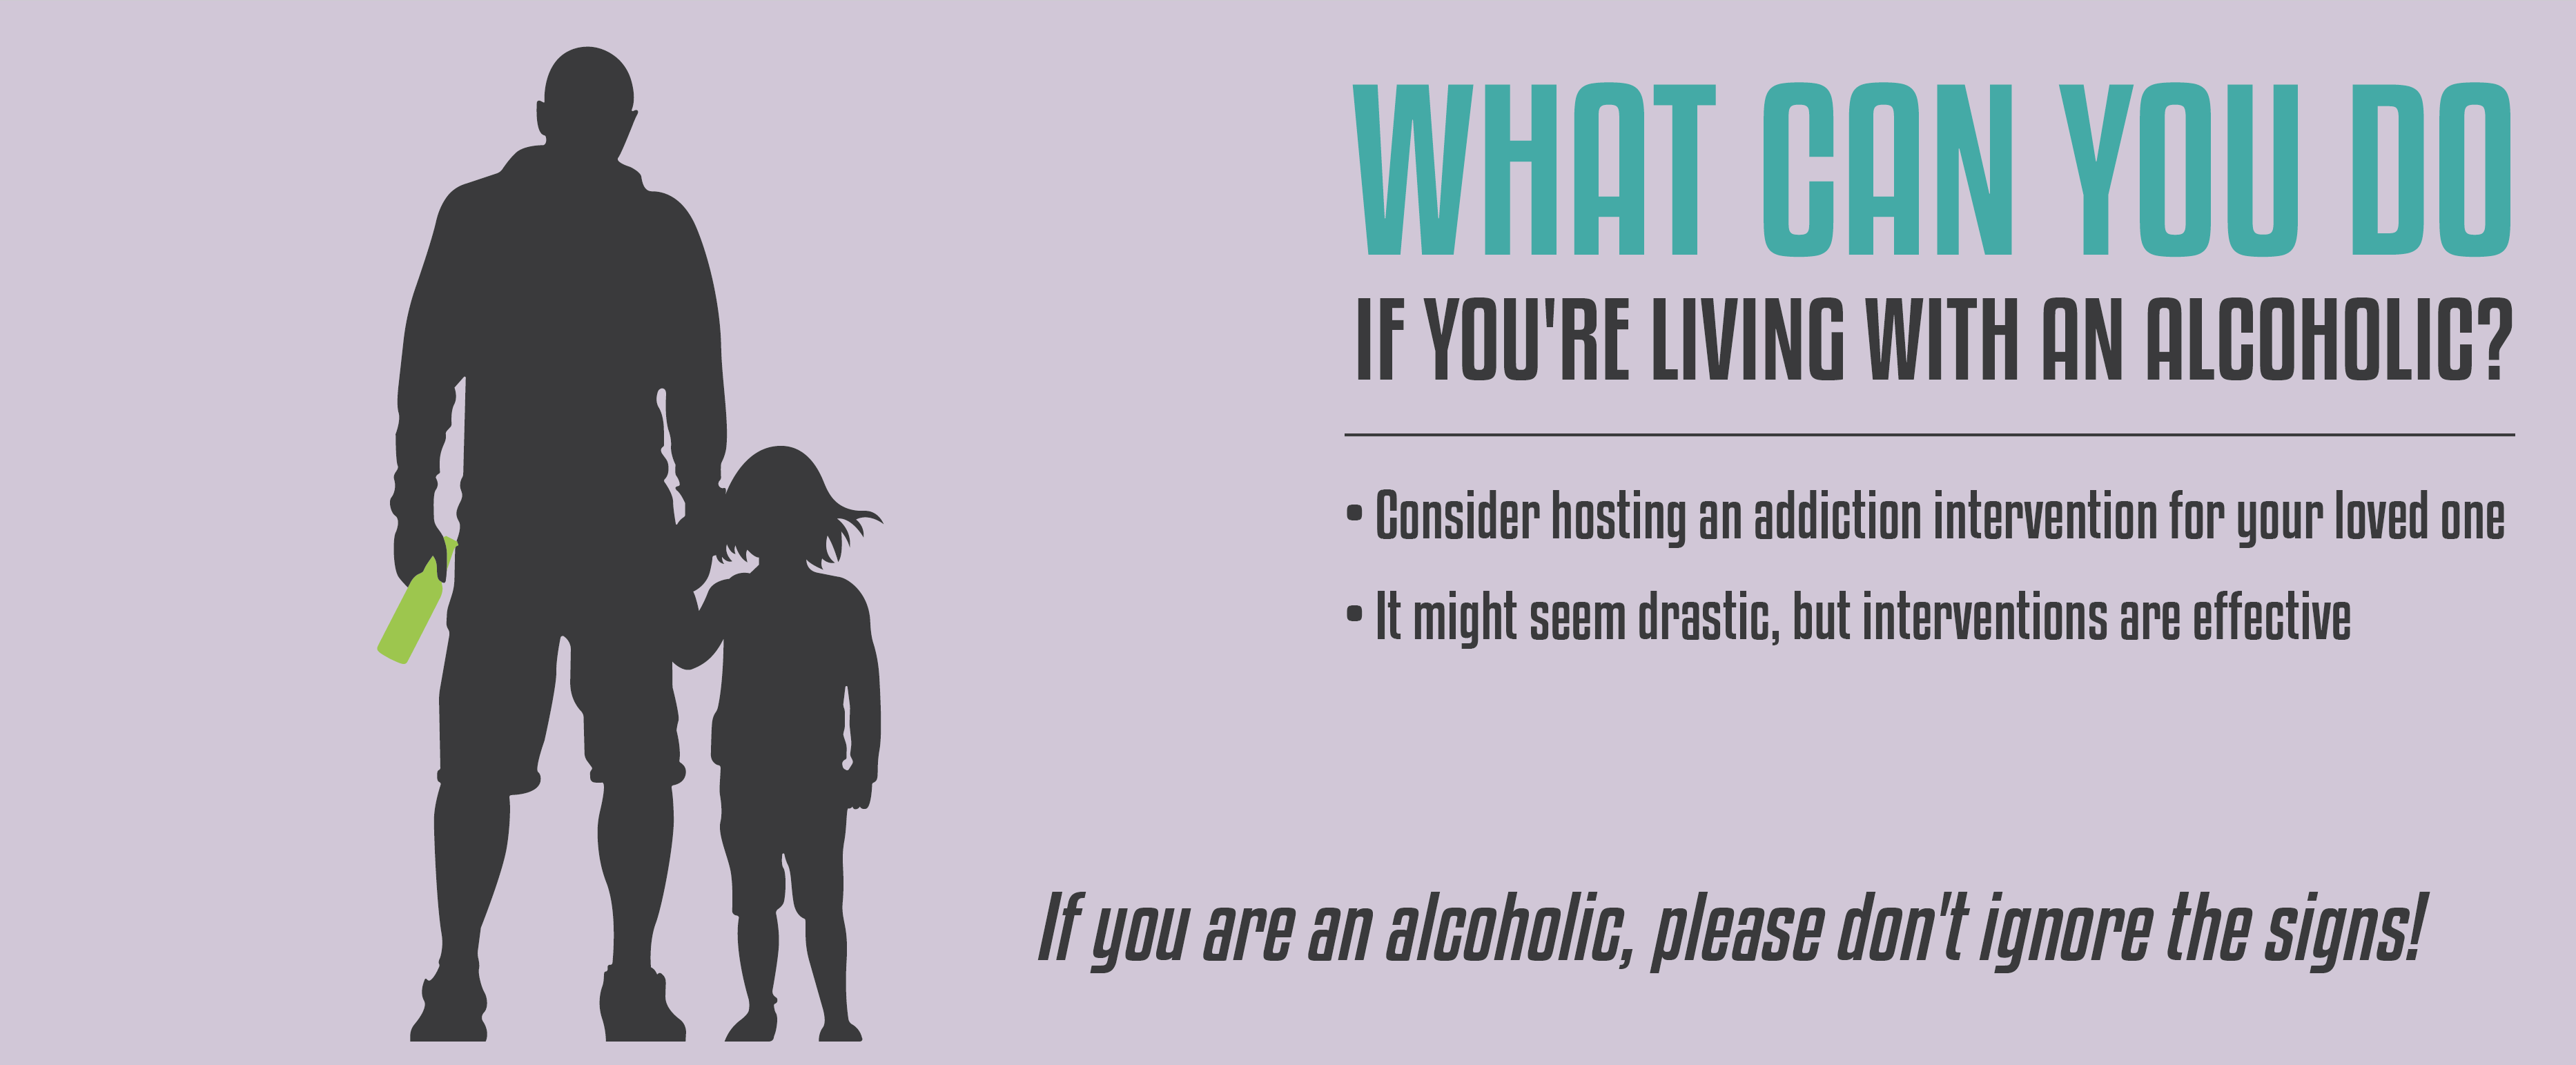 What Can You do if You're Living With an Alcoholic?